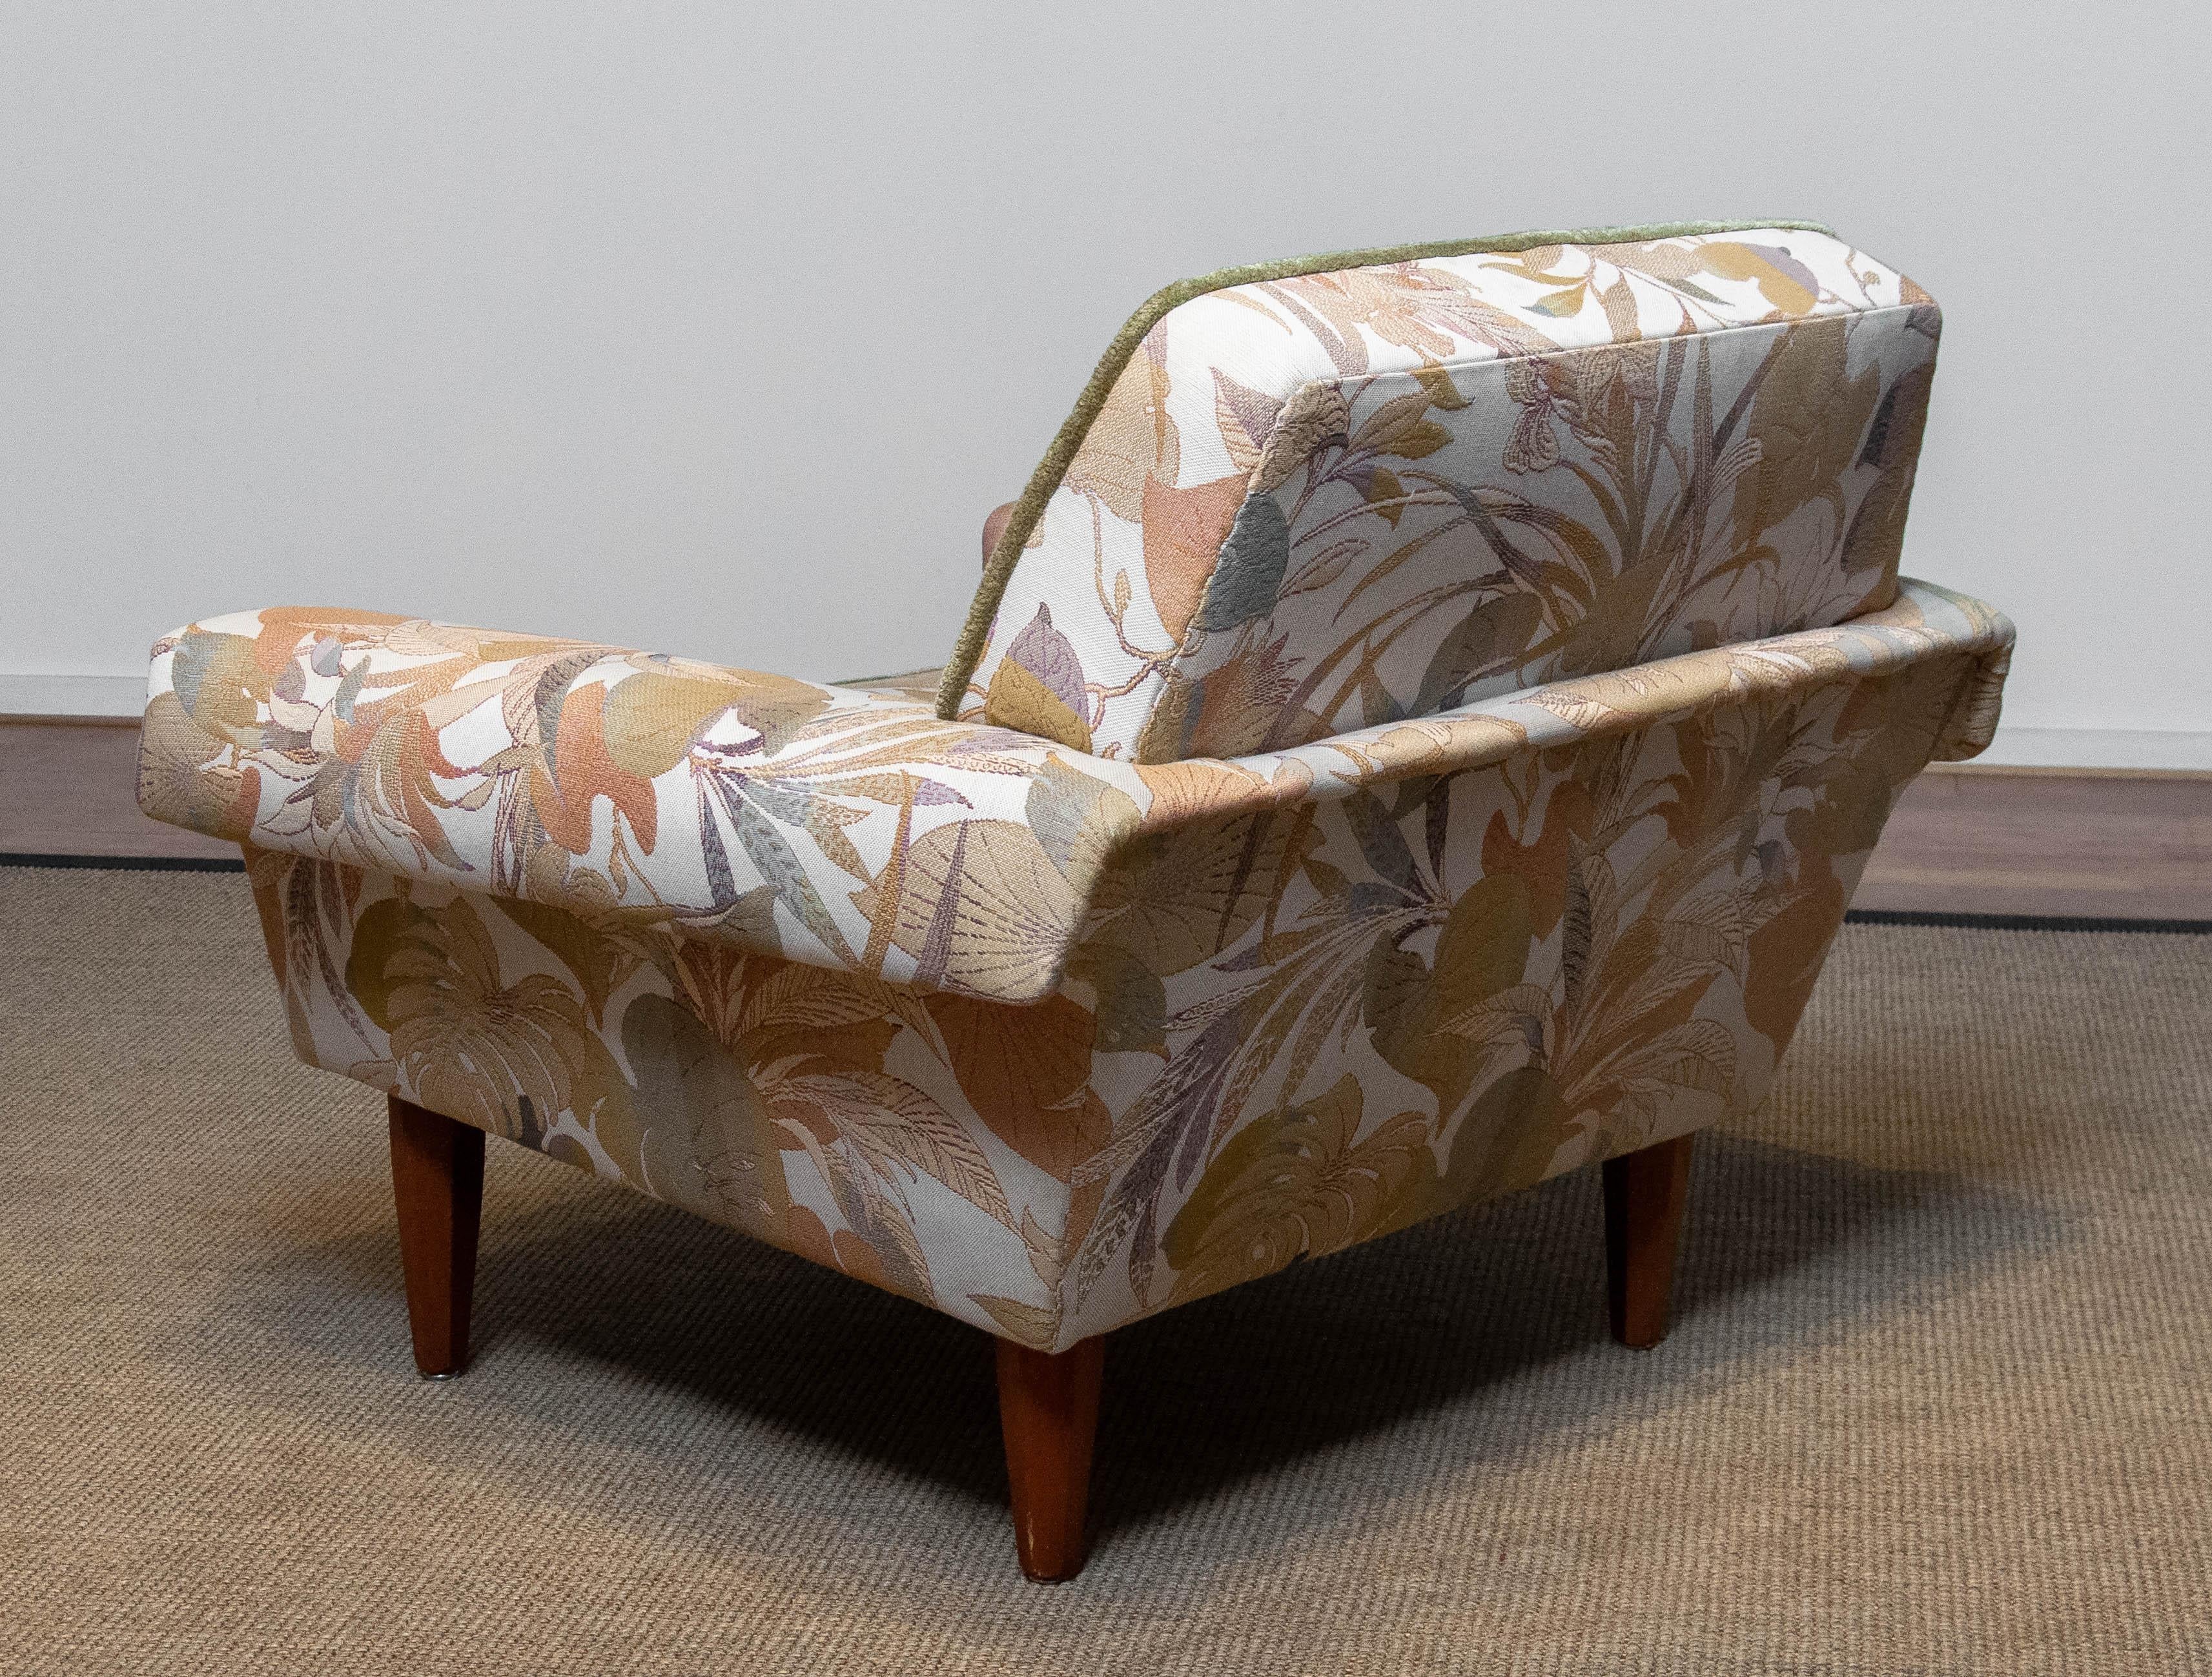 Danish Low Back Lounge Chair Upholstered Floral Jacquard Fabric from the 1970's In Good Condition For Sale In Silvolde, Gelderland